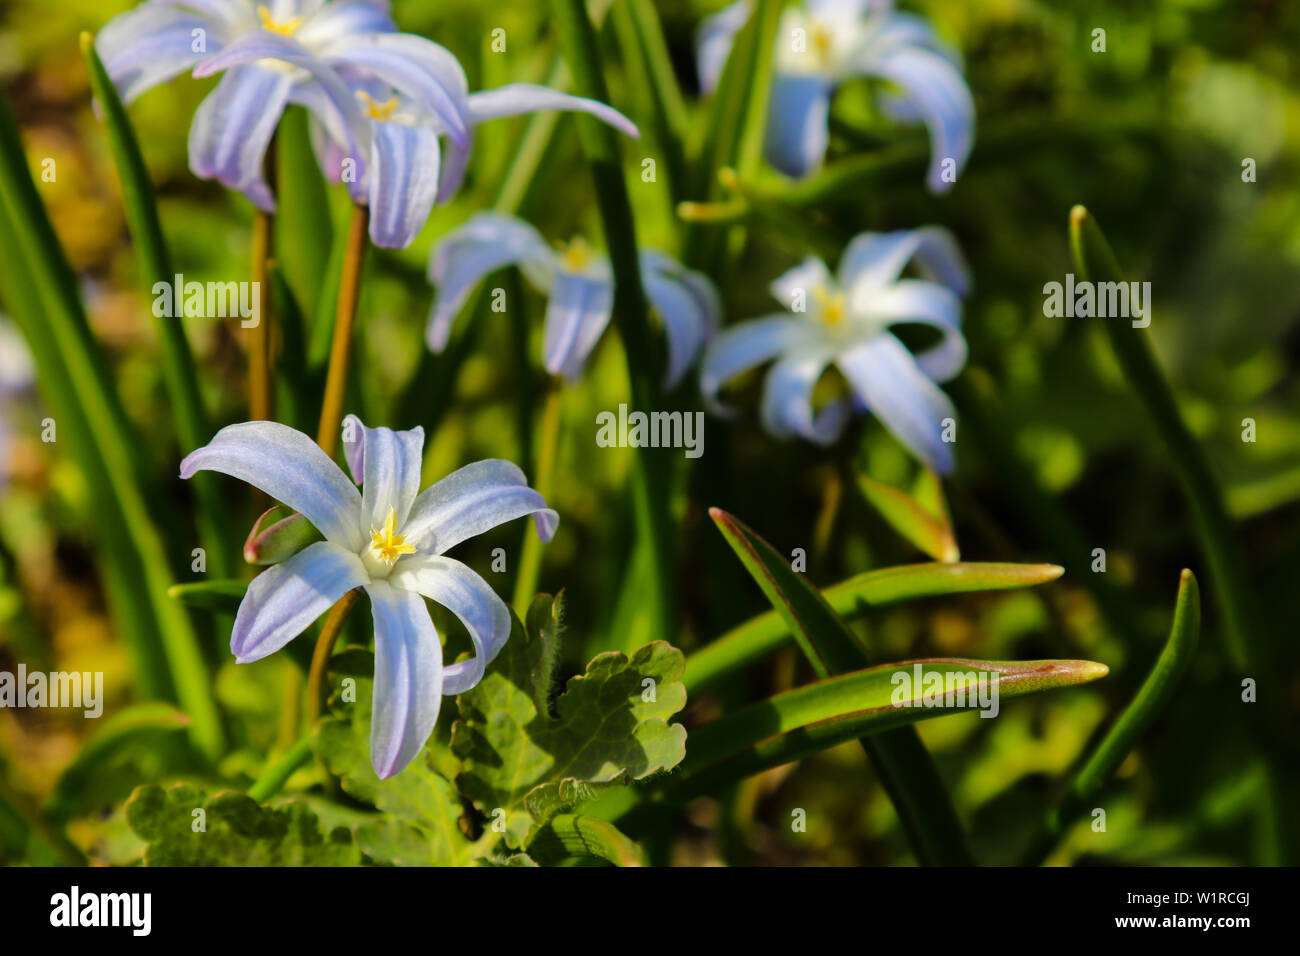 Chionodoxa forbesii blue giant or glory of the snow spring flowers Stock Photo